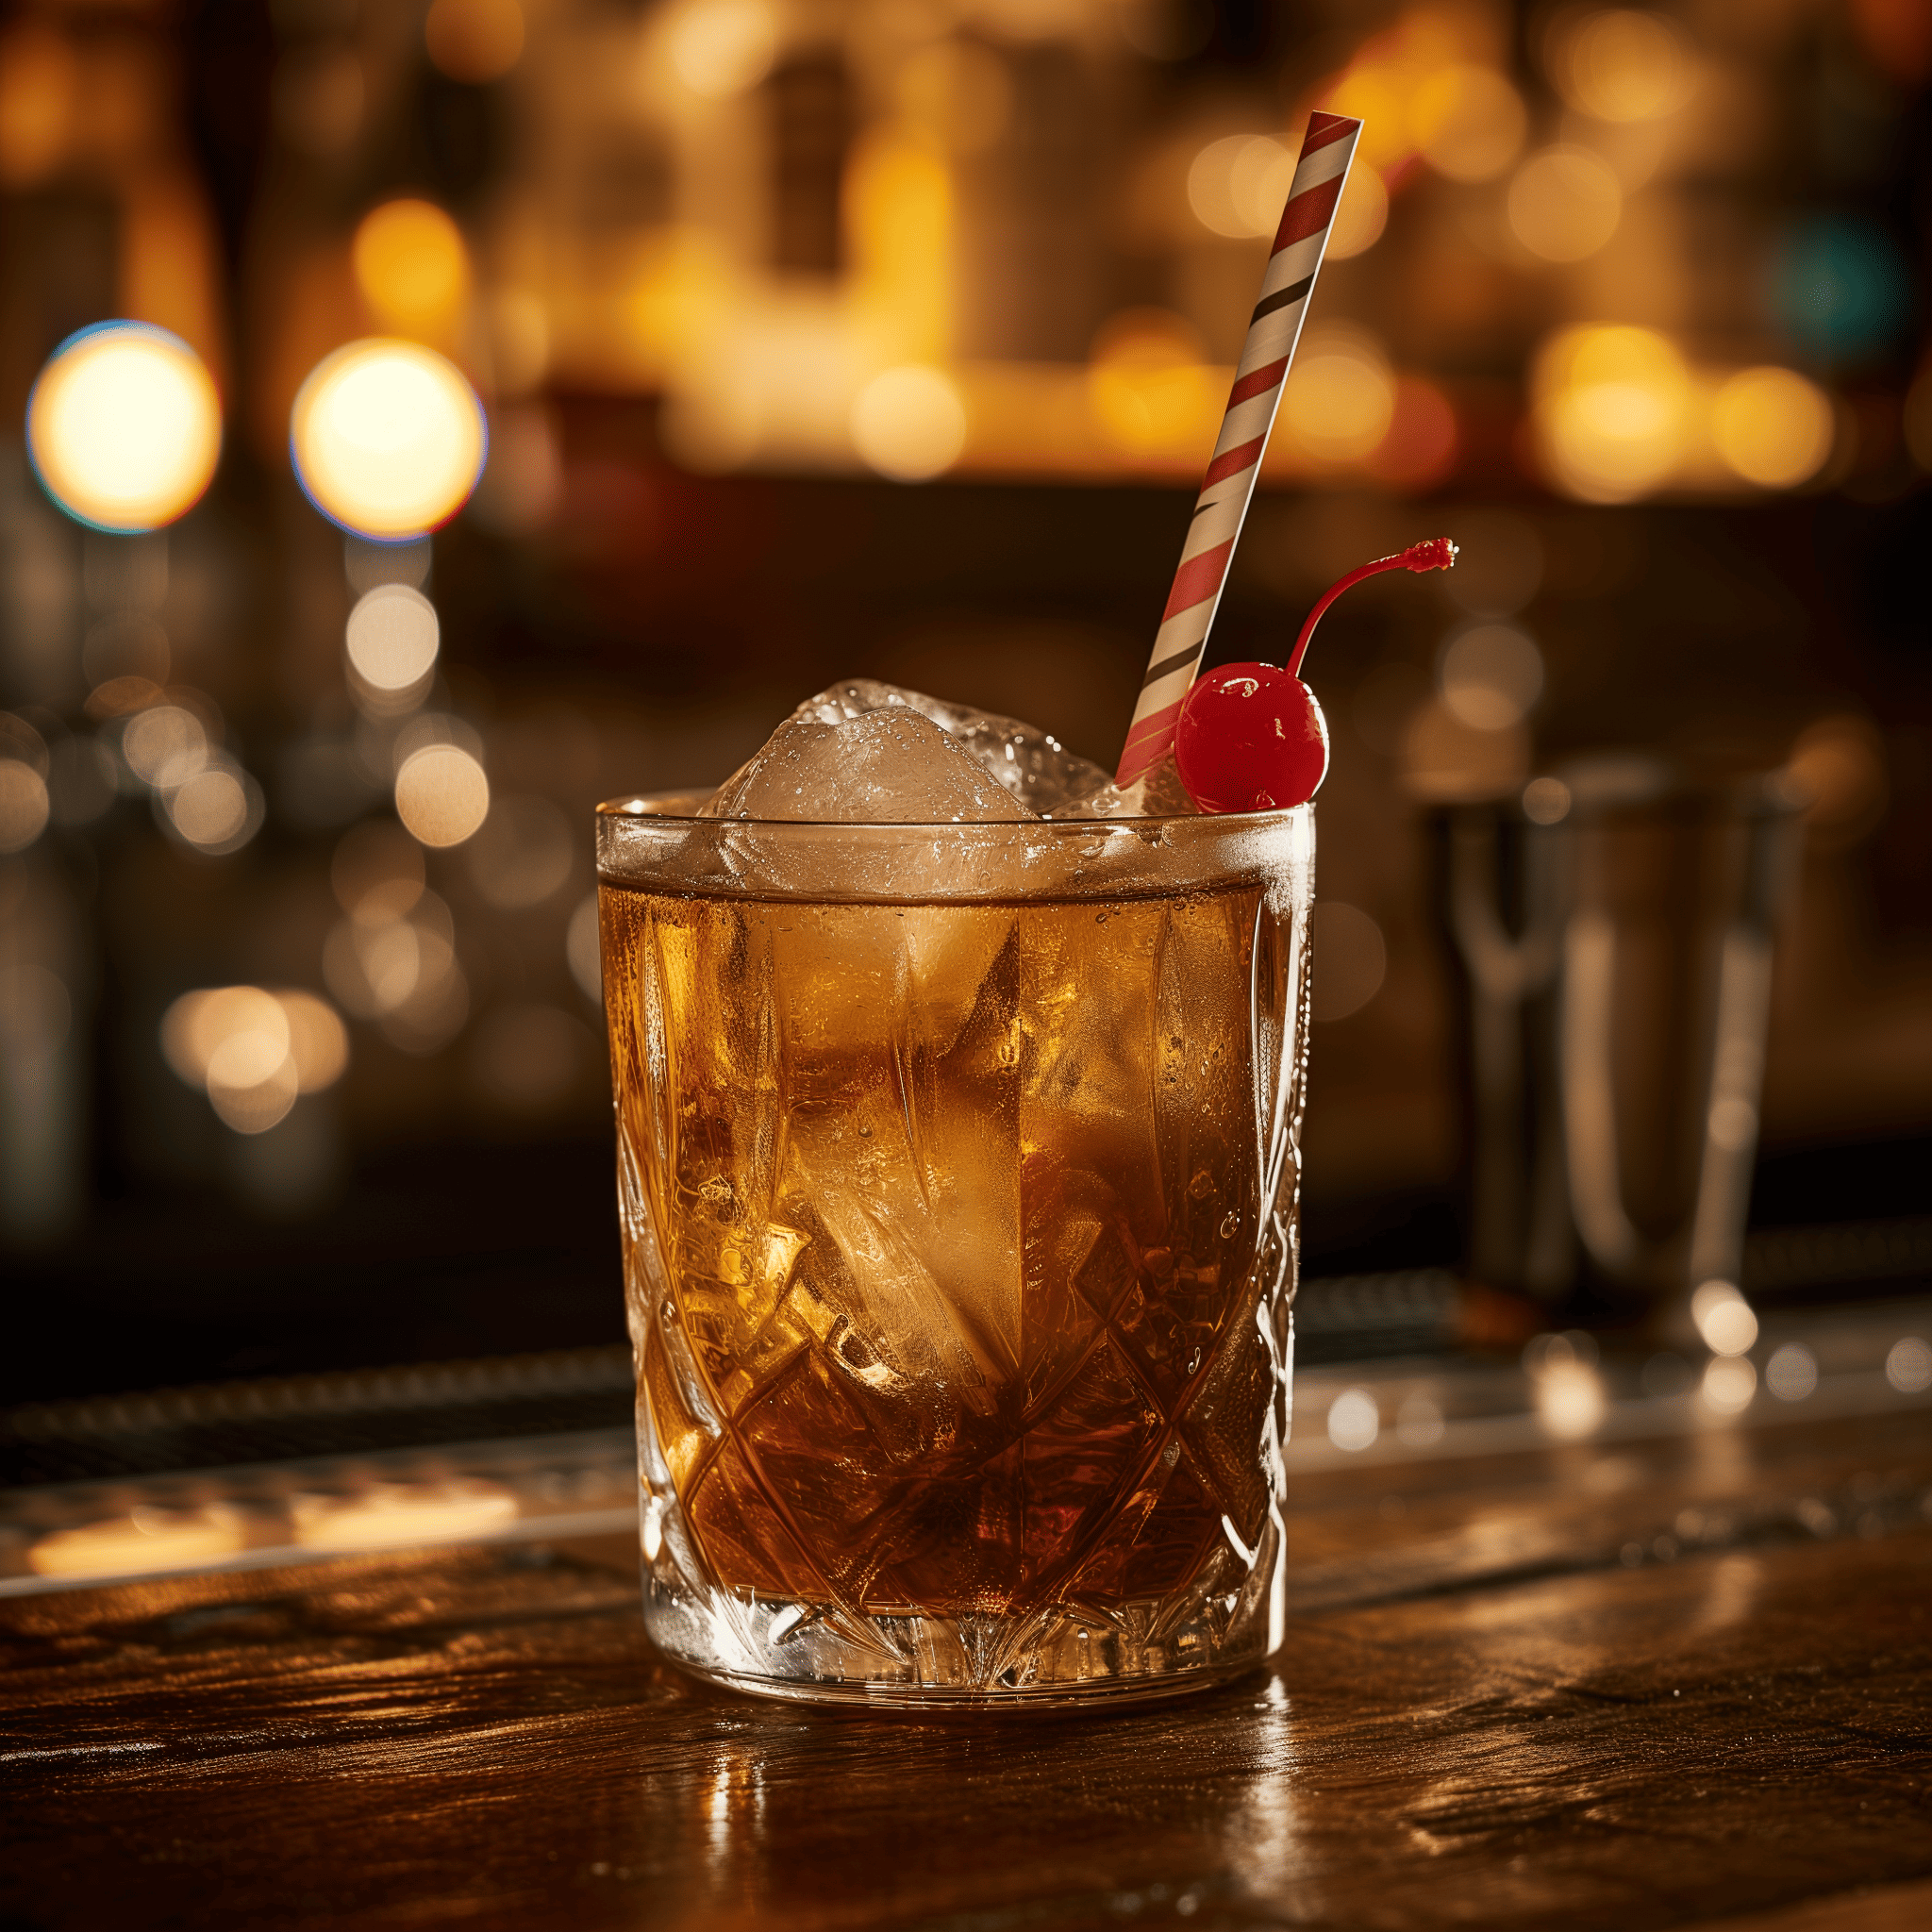 Bourbon & Root Beer Cocktail Recipe - The Bourbon & Root Beer cocktail is a harmonious blend of sweet and spicy, with the vanilla and caramel notes of bourbon complementing the sassafras and licorice flavors of the root beer. It's a medium-bodied drink with a smooth finish, offering a comforting warmth from the bourbon.